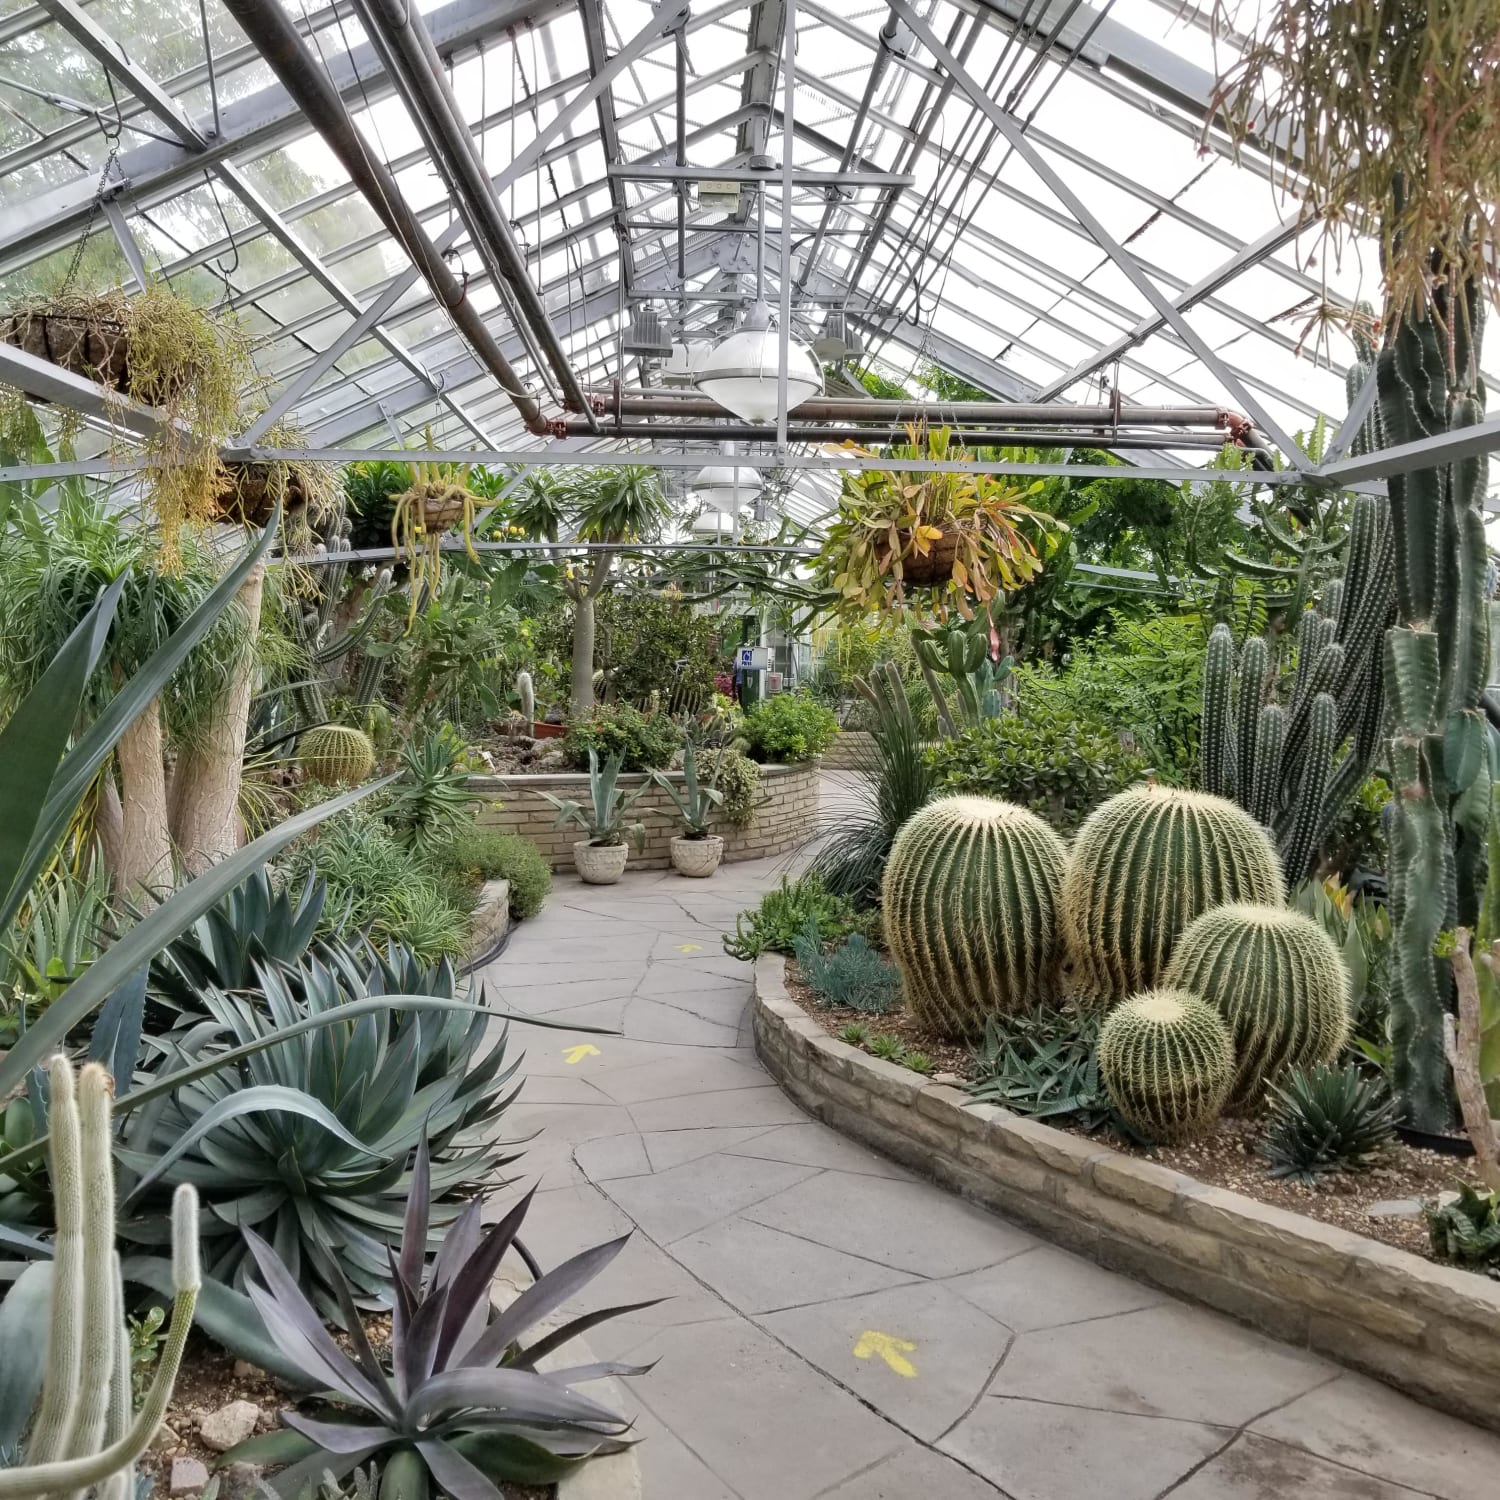 I went to the Allan Gardens conservatory (in Toronto, Canada) this morning. Thought you would appreciate this :)